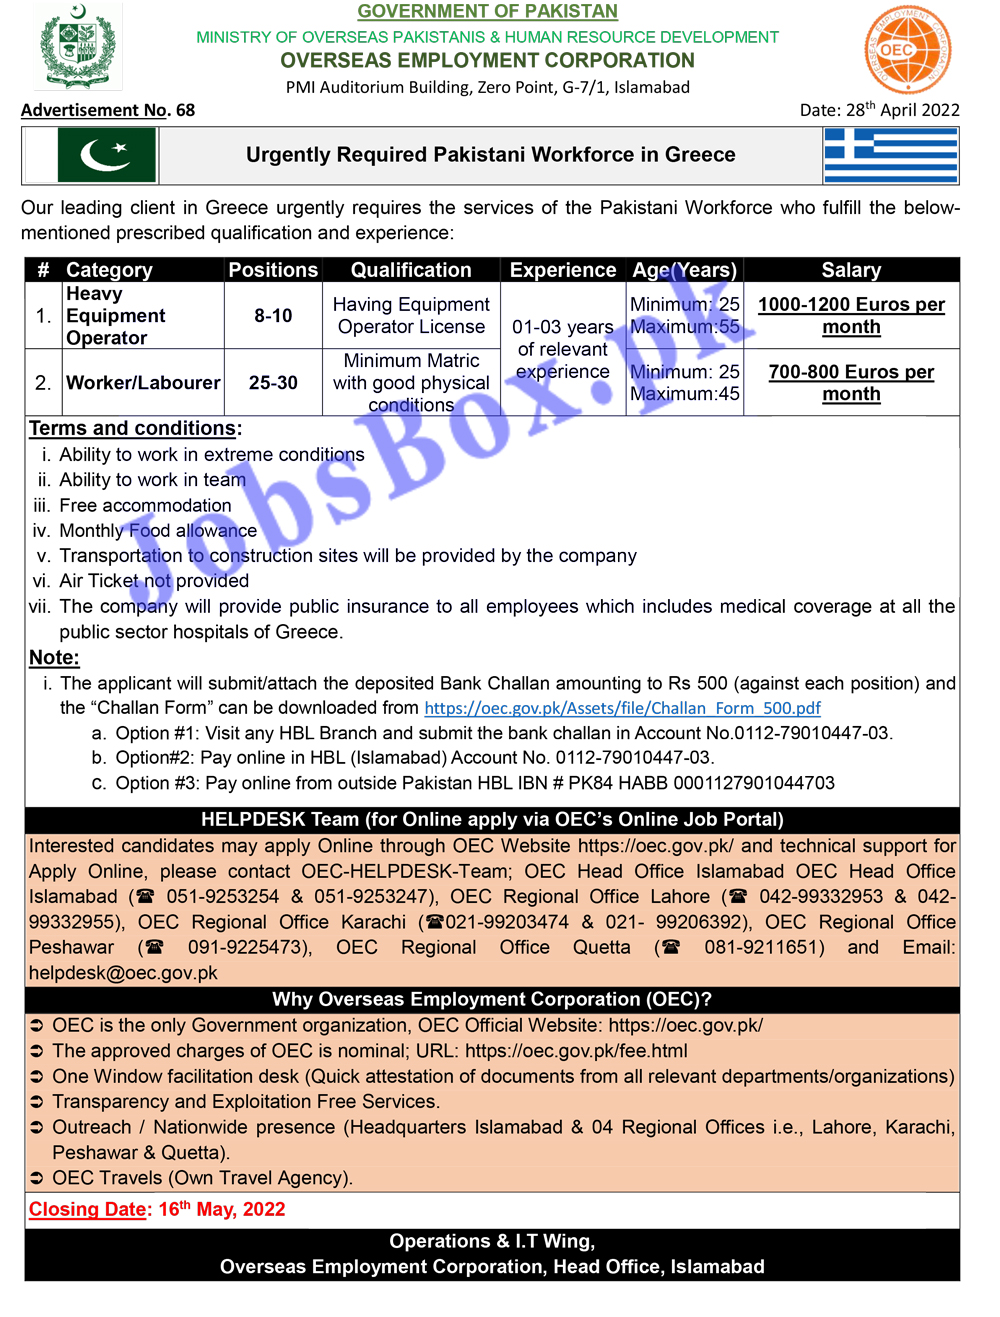 OEC Jobs in Greece for Pakistanis Fill Online Application Form